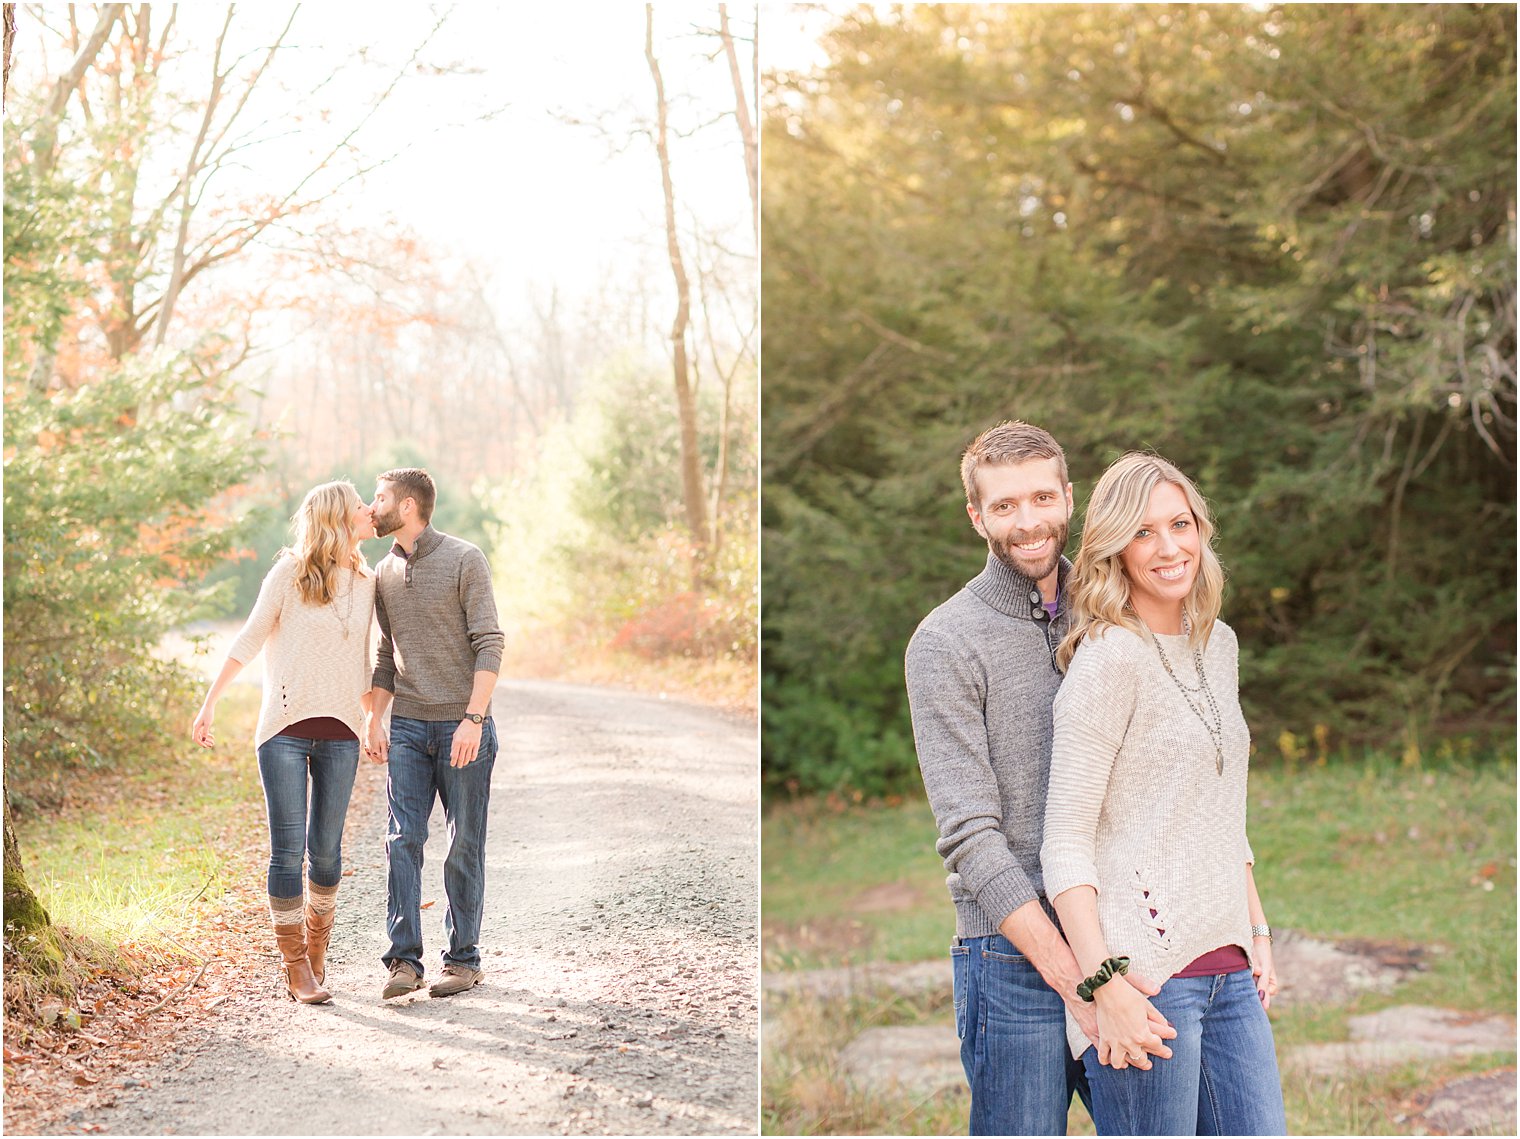 Woodsy engagement session in Pennsylvania by Idalia Photography